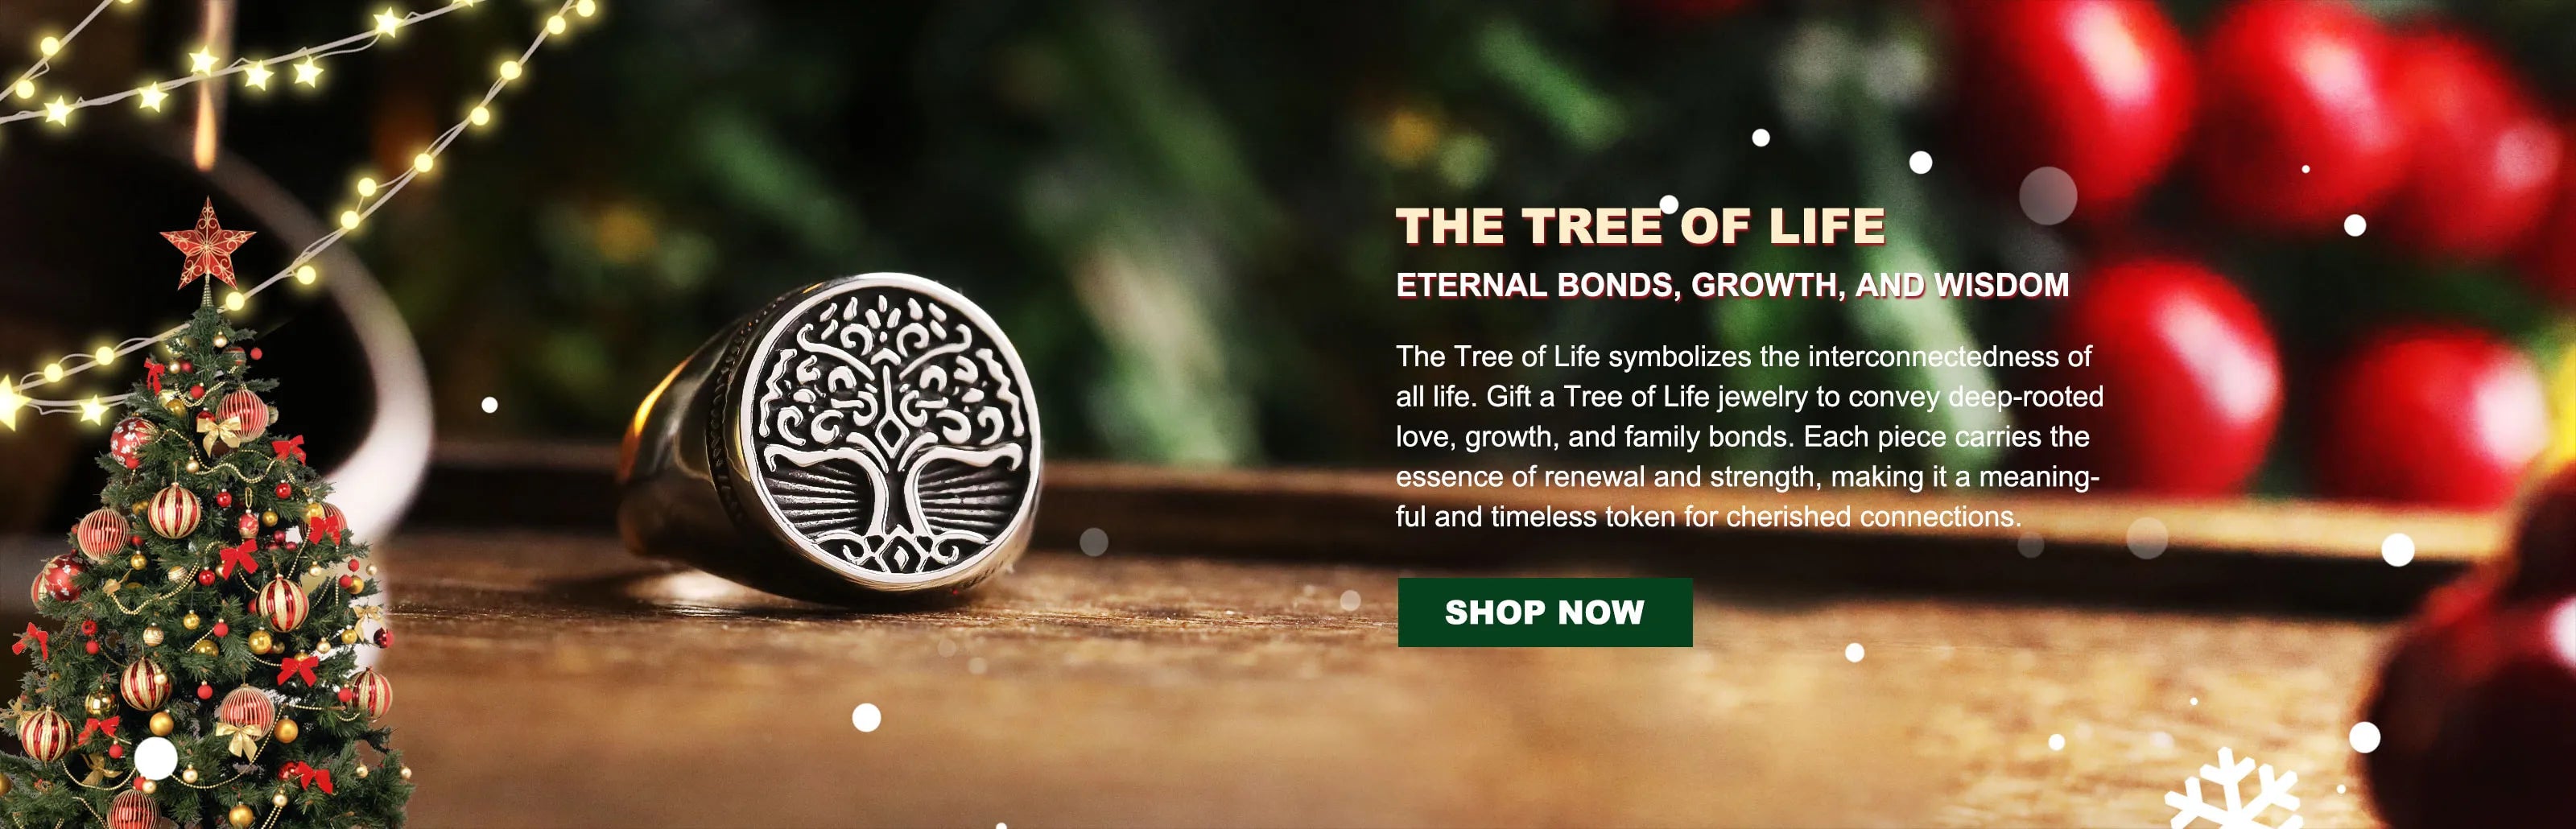 wolfha jewelry tree of life jewelry collection